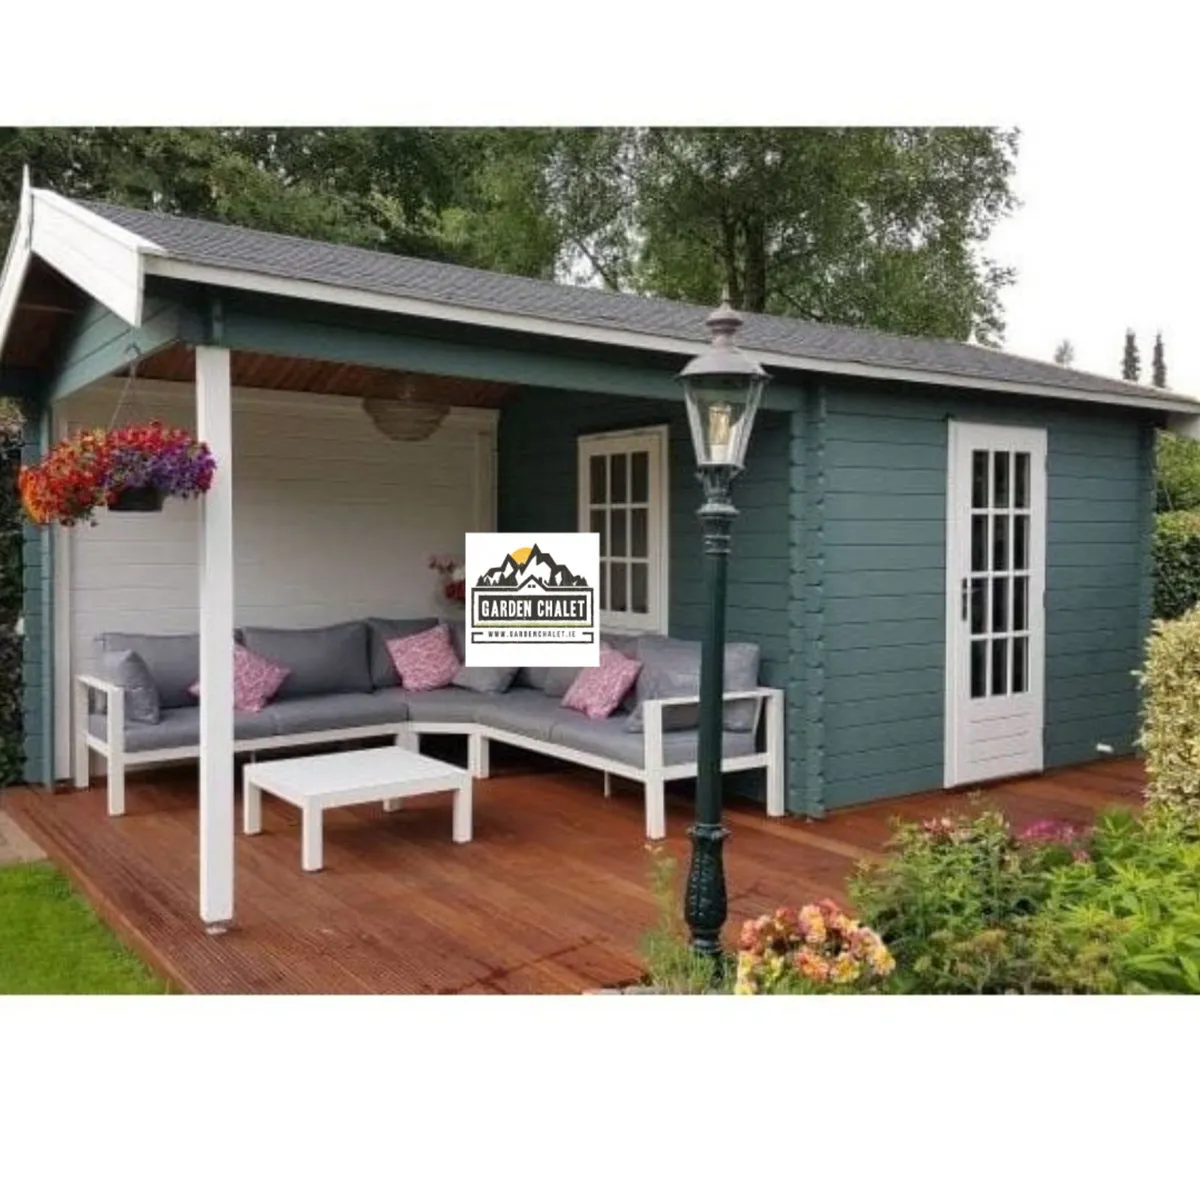 Garden Chalets & Offices Clearance Sale!!!!!